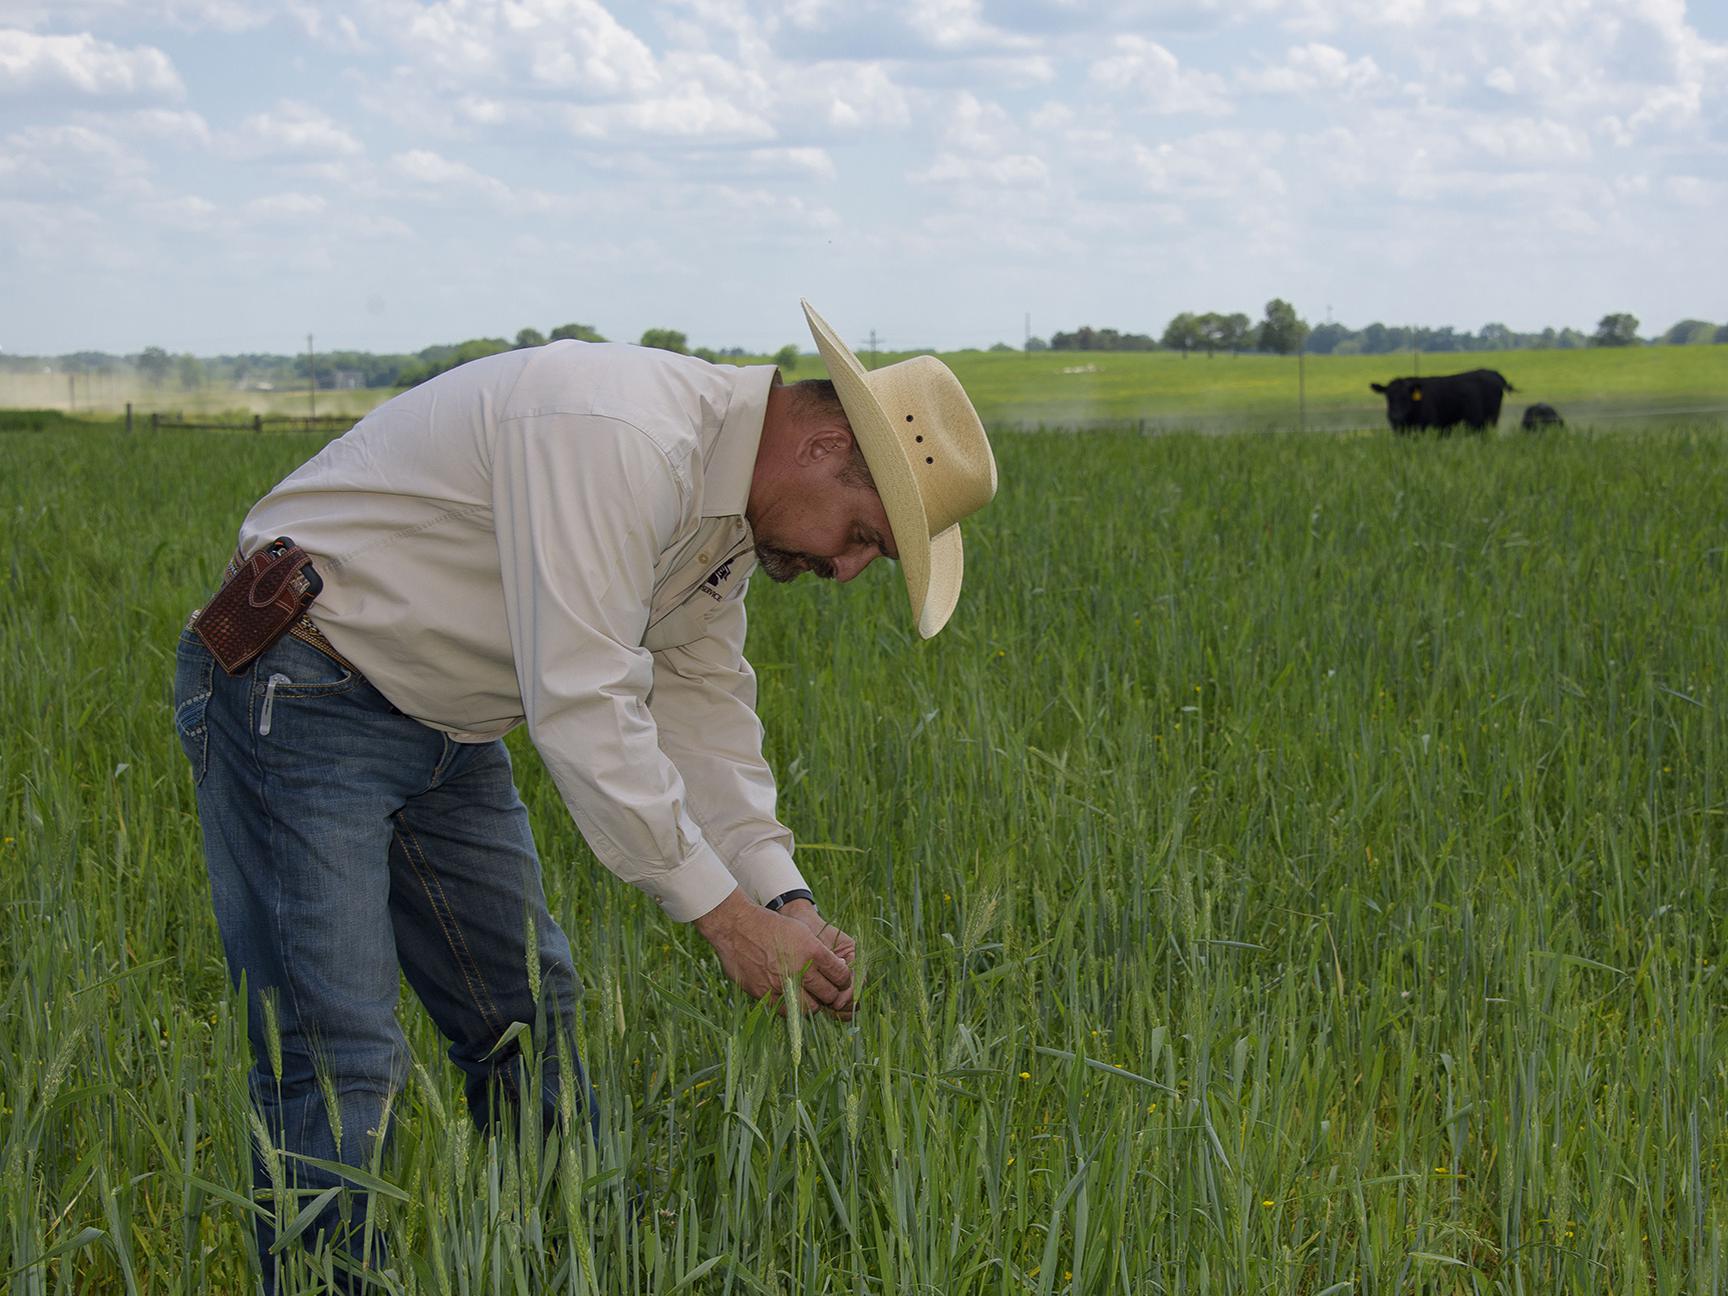 Mississippi State University Extension Service forage specialist Rocky Lemus inspects wheat interseeded with balansa clover at the H.H. Leveck Animal Research Center in Starkville, Mississippi, on April 20, 2017. (Photo by MSU Extension Service/Kevin Hudson)